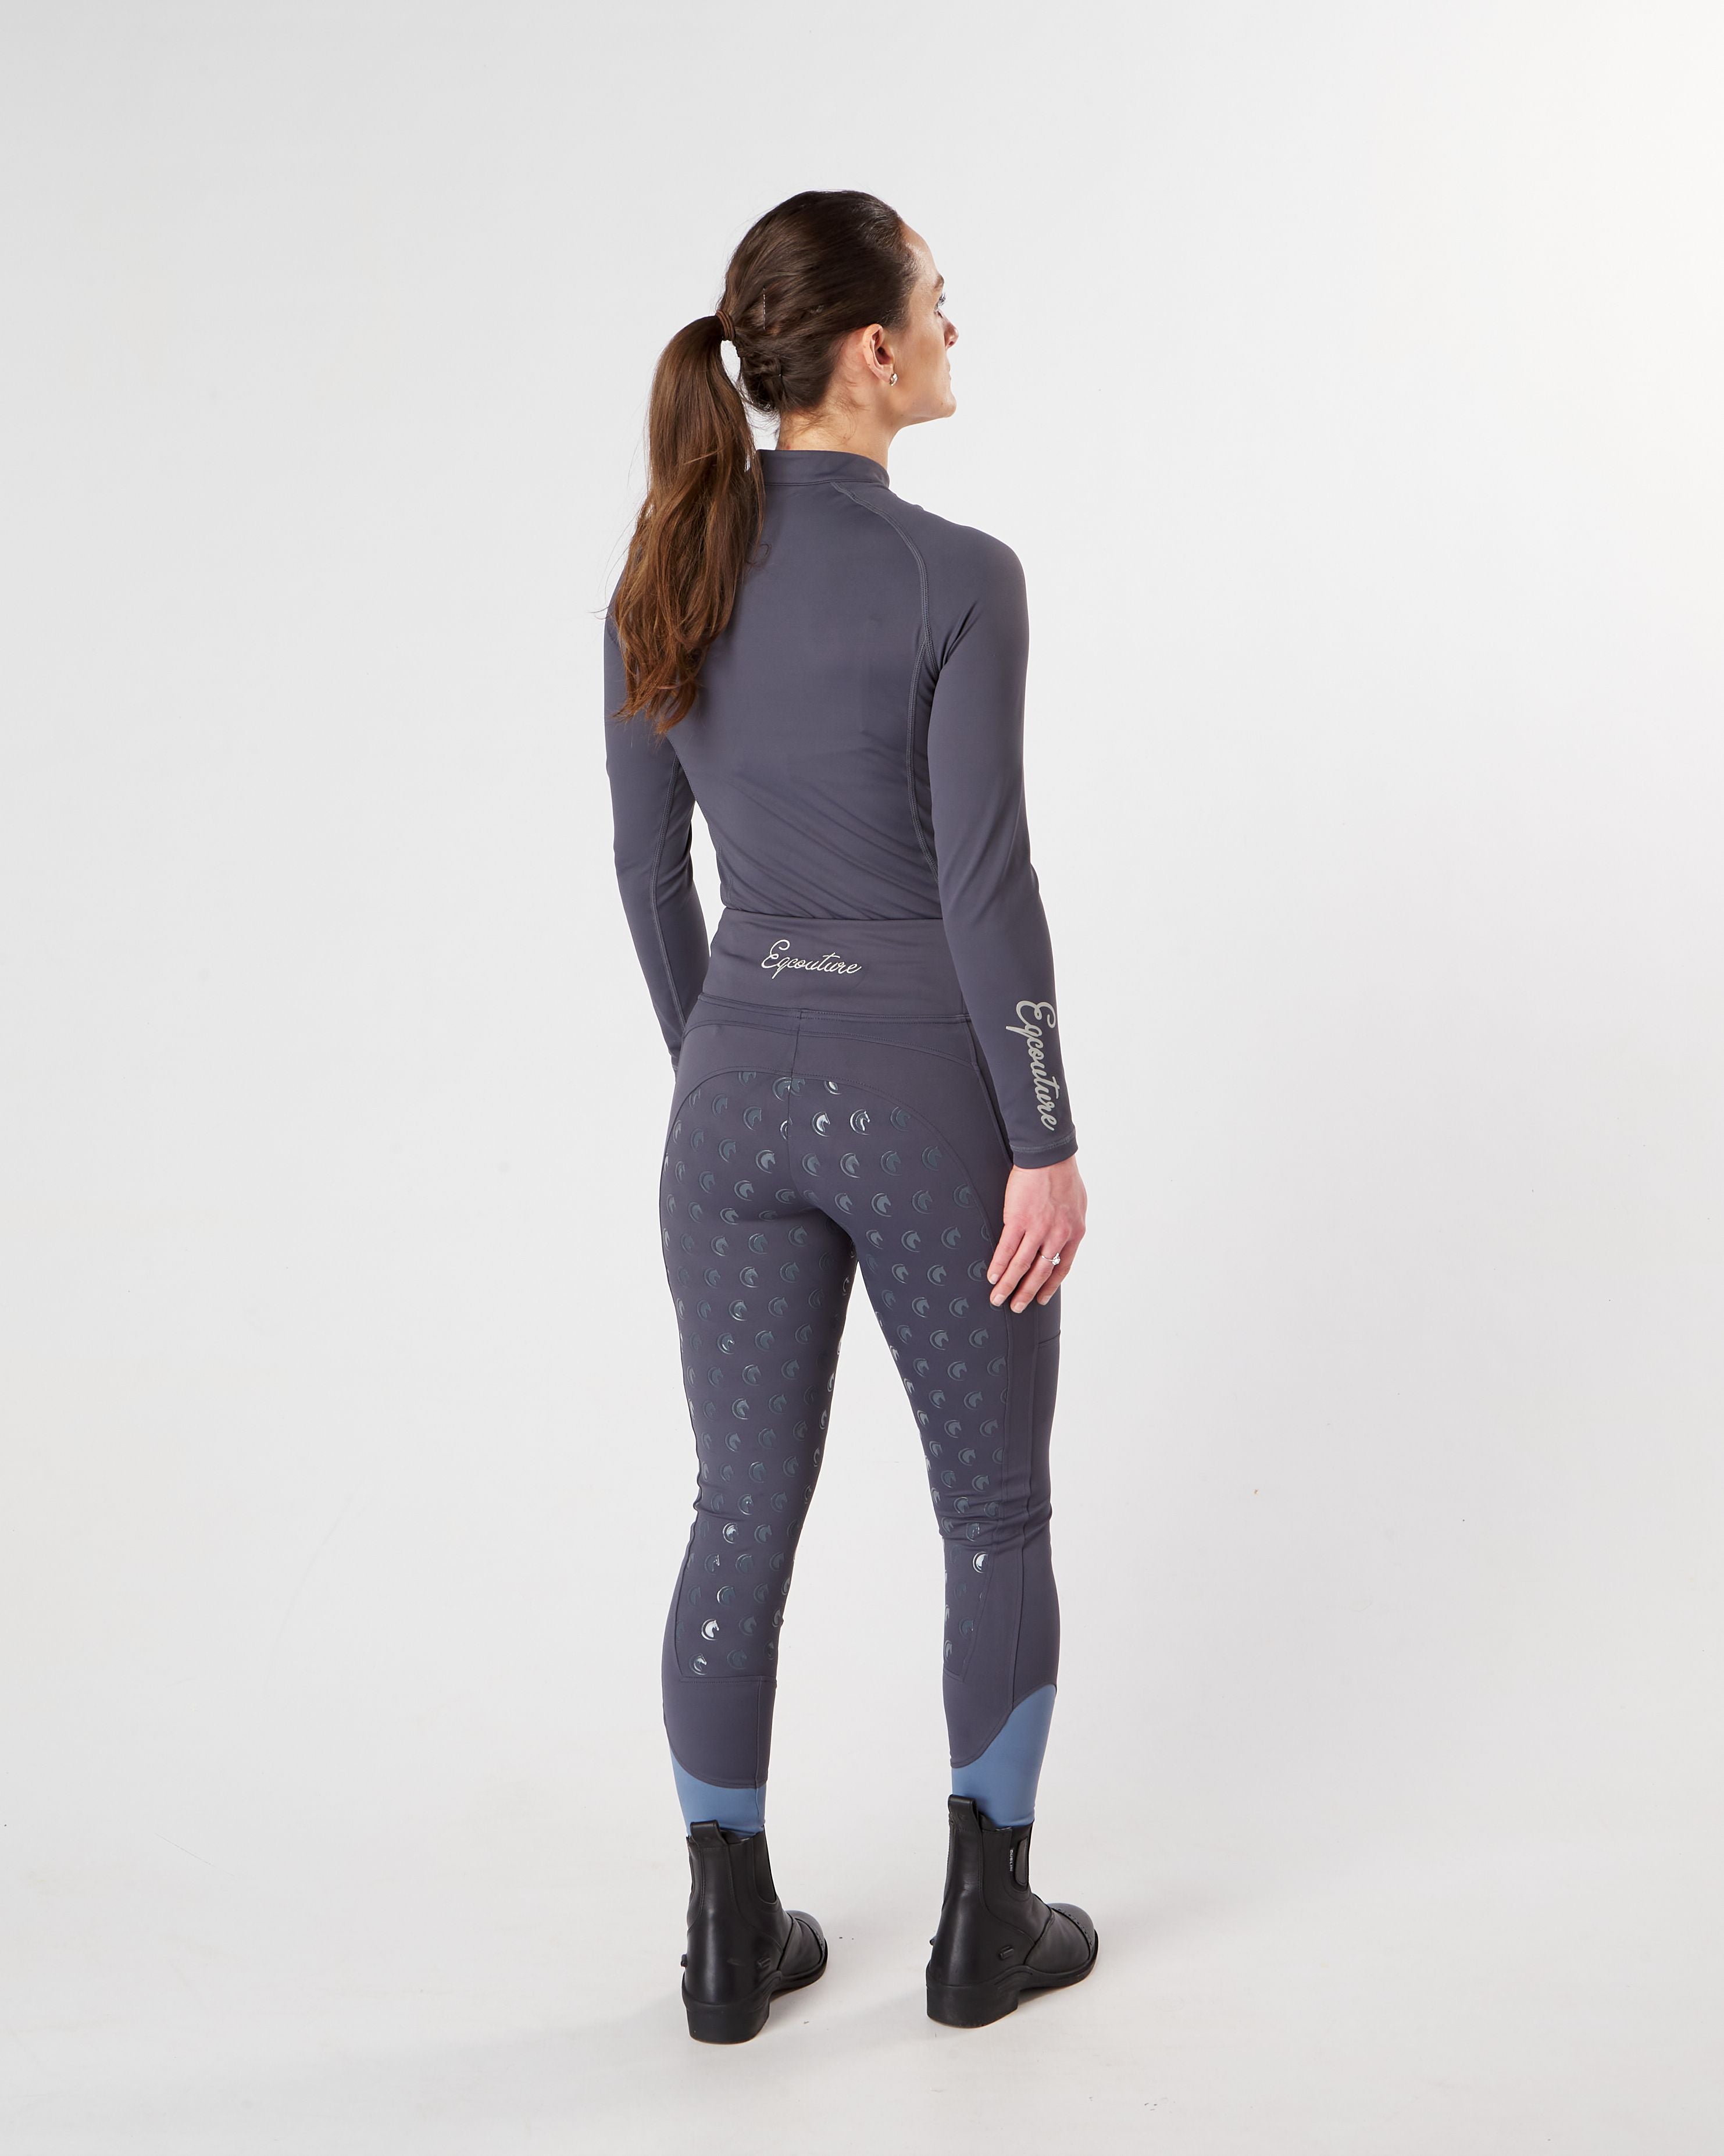 Winter Thermal Horse Riding Tights / Leggings w/ phone pockets - GREY